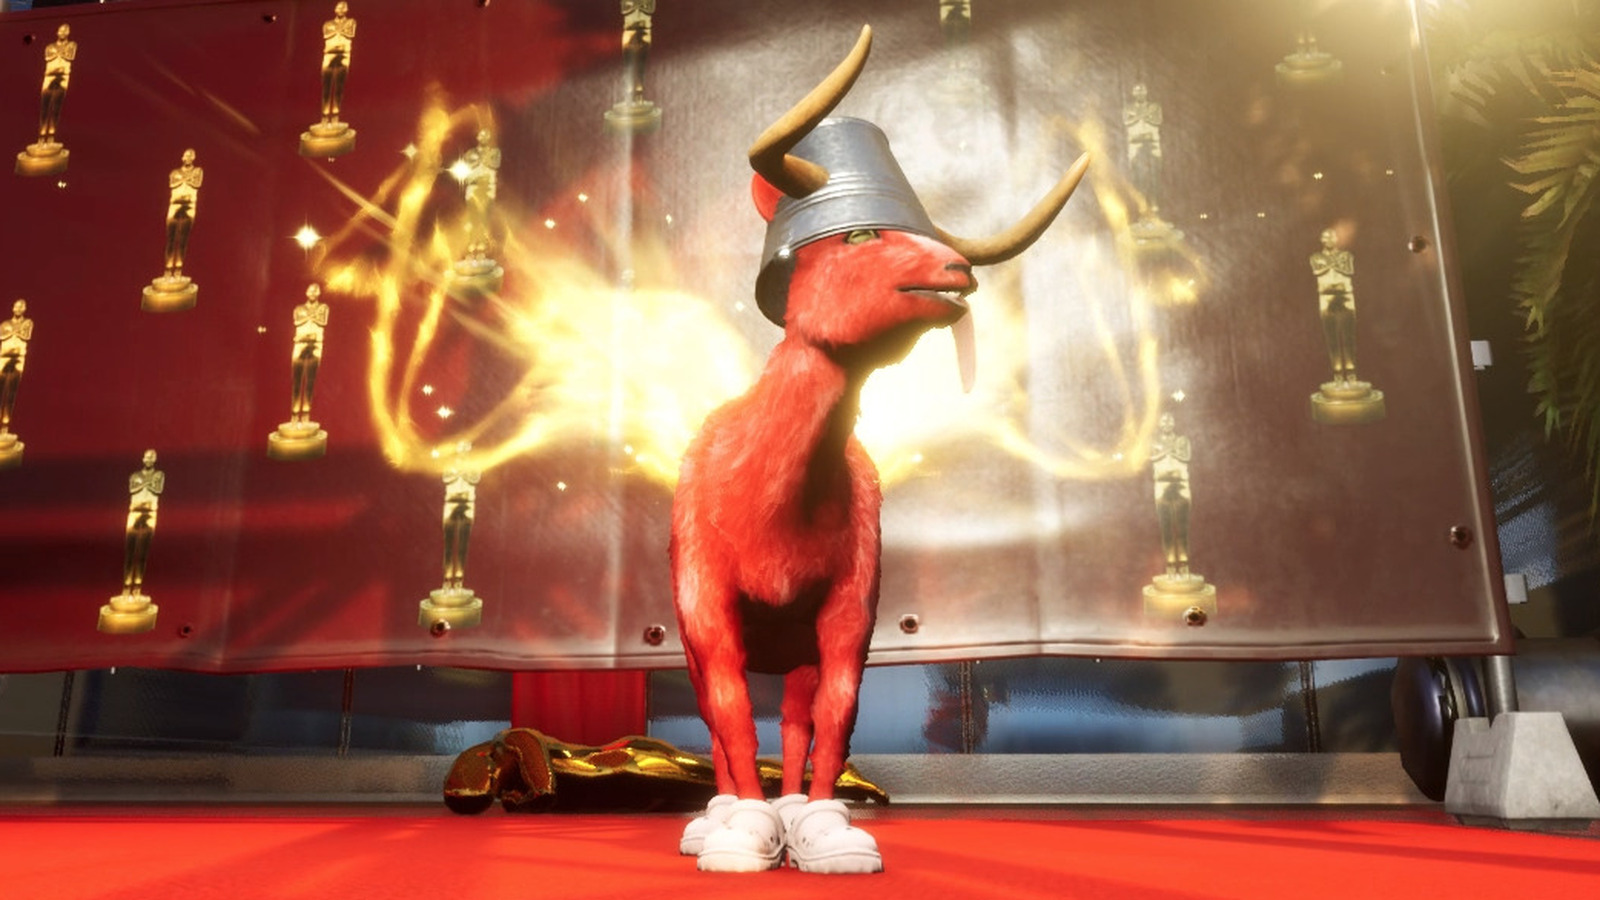 Goat Simulator 3 Review: An Even Better Fever Dream Than The First